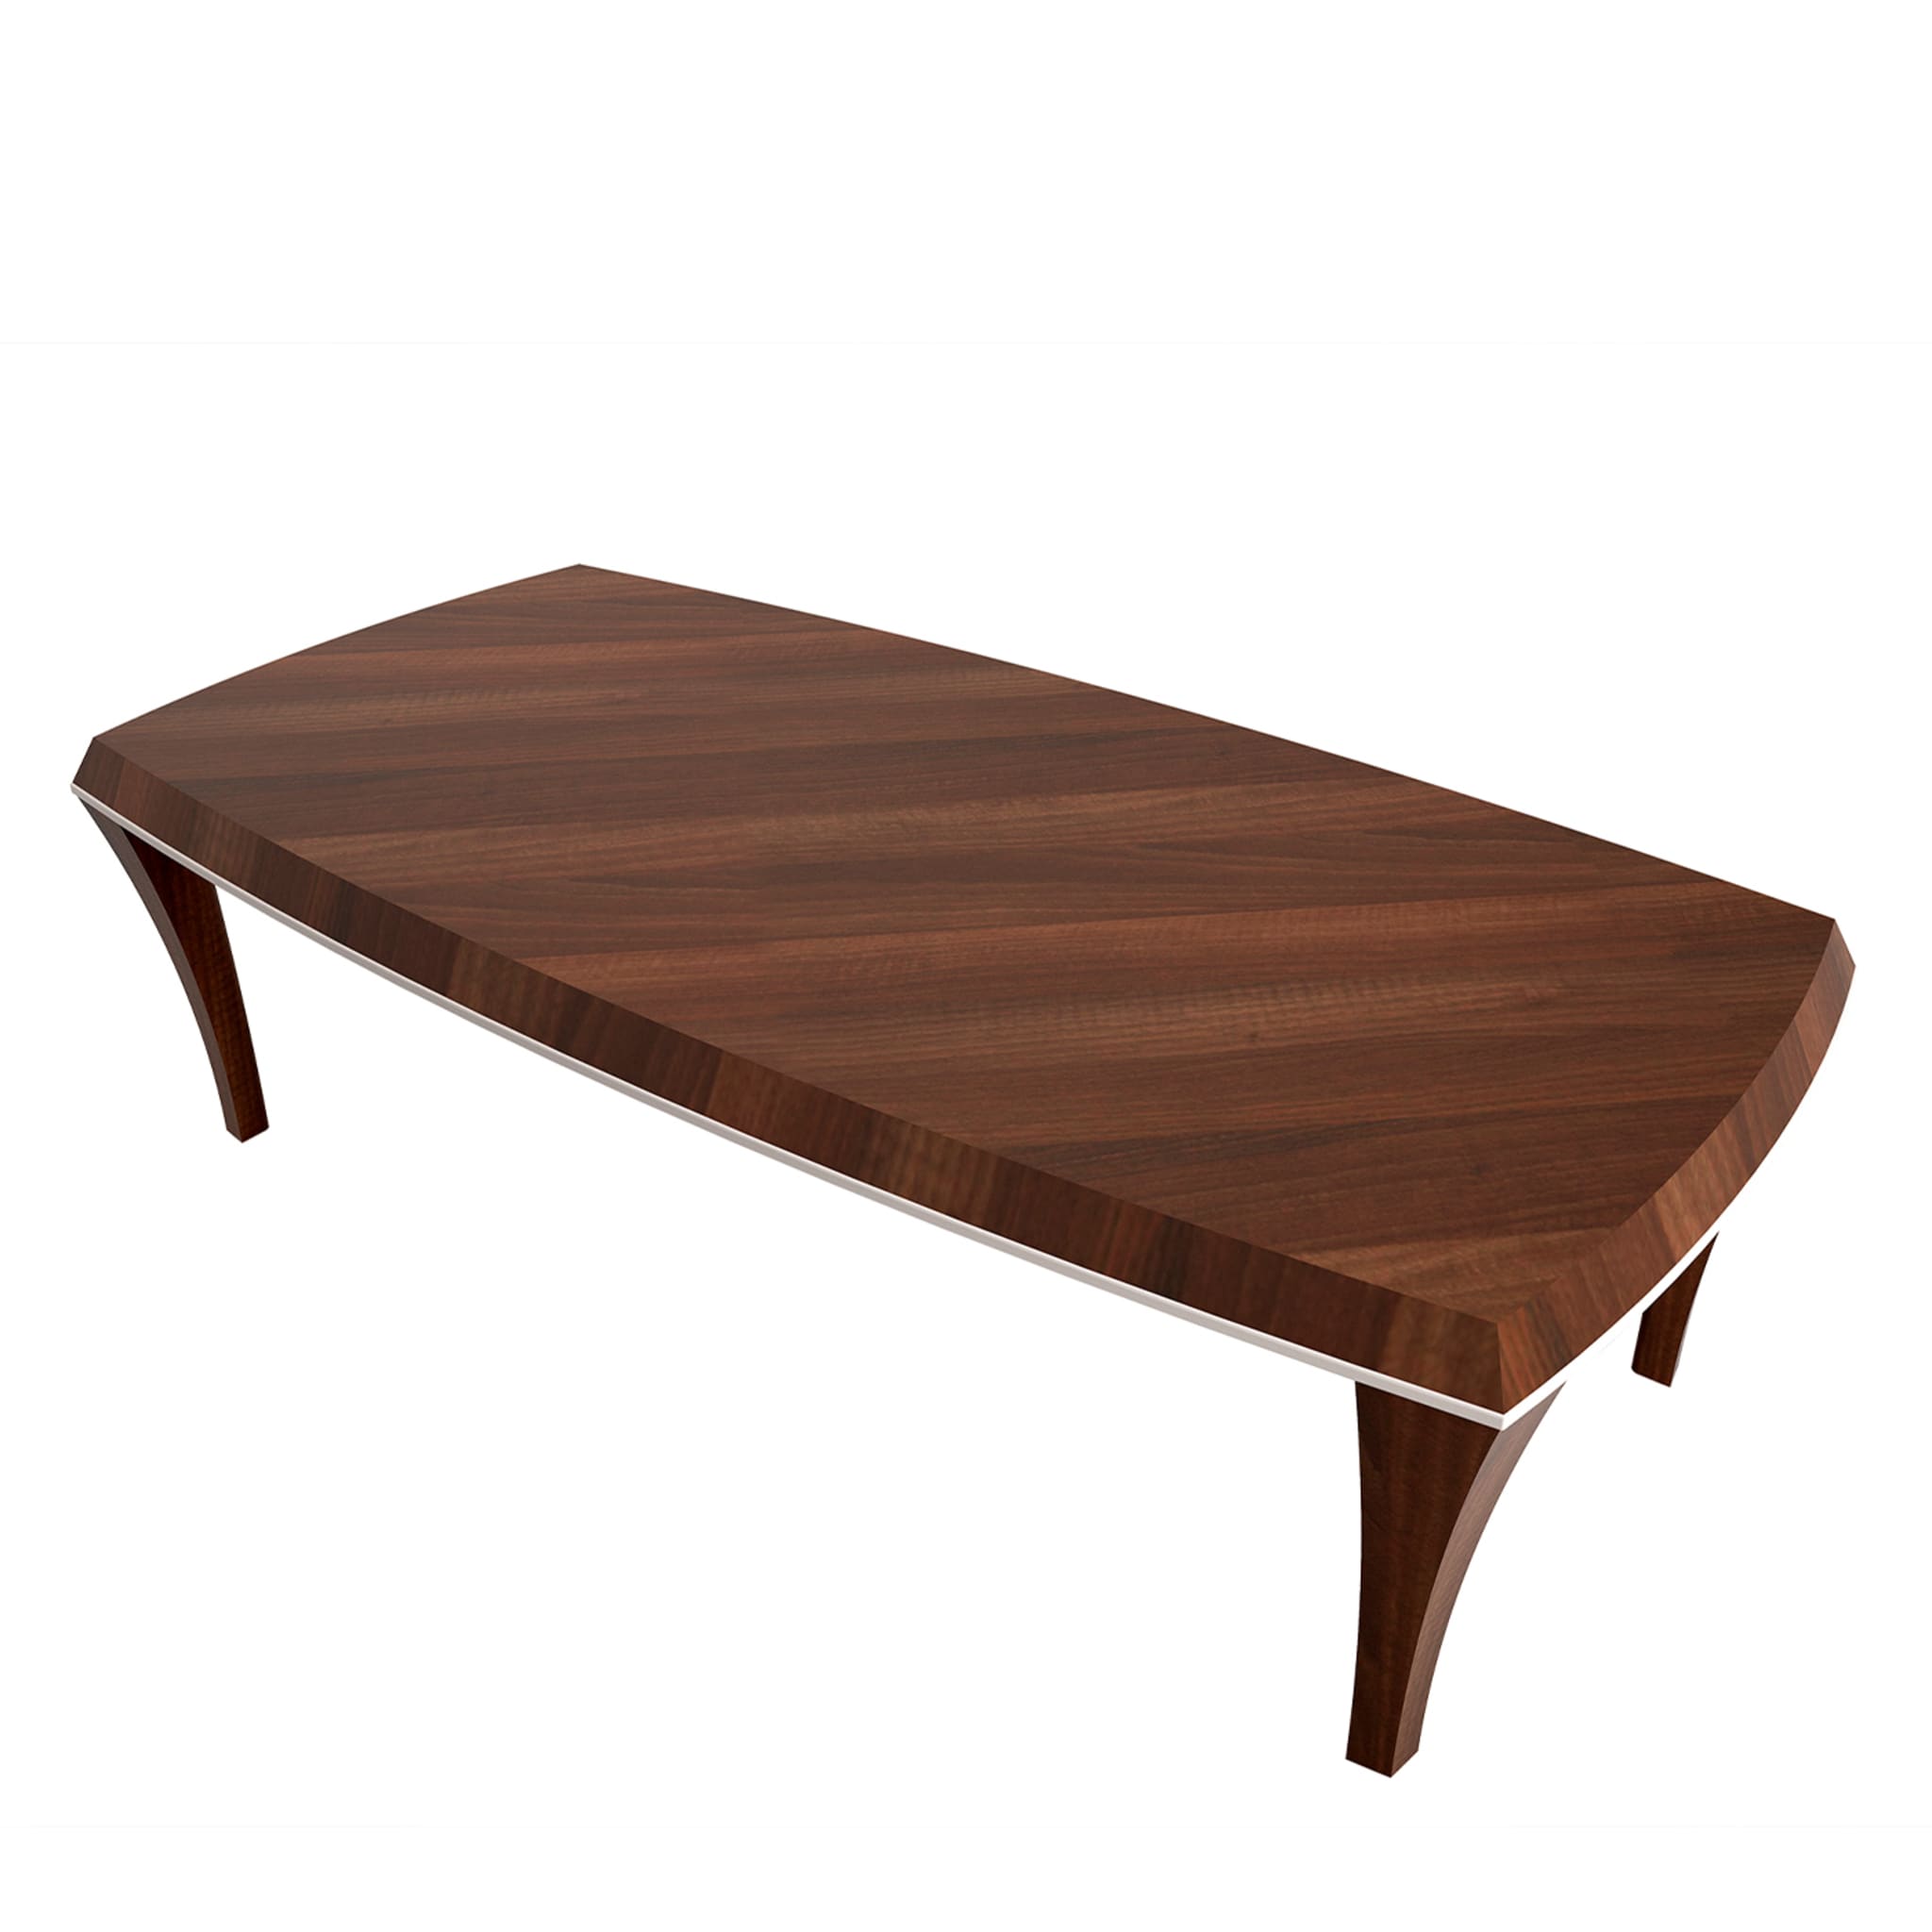 Broadway Rectangular Coffee Table by Hanno Giesler - Alternative view 1